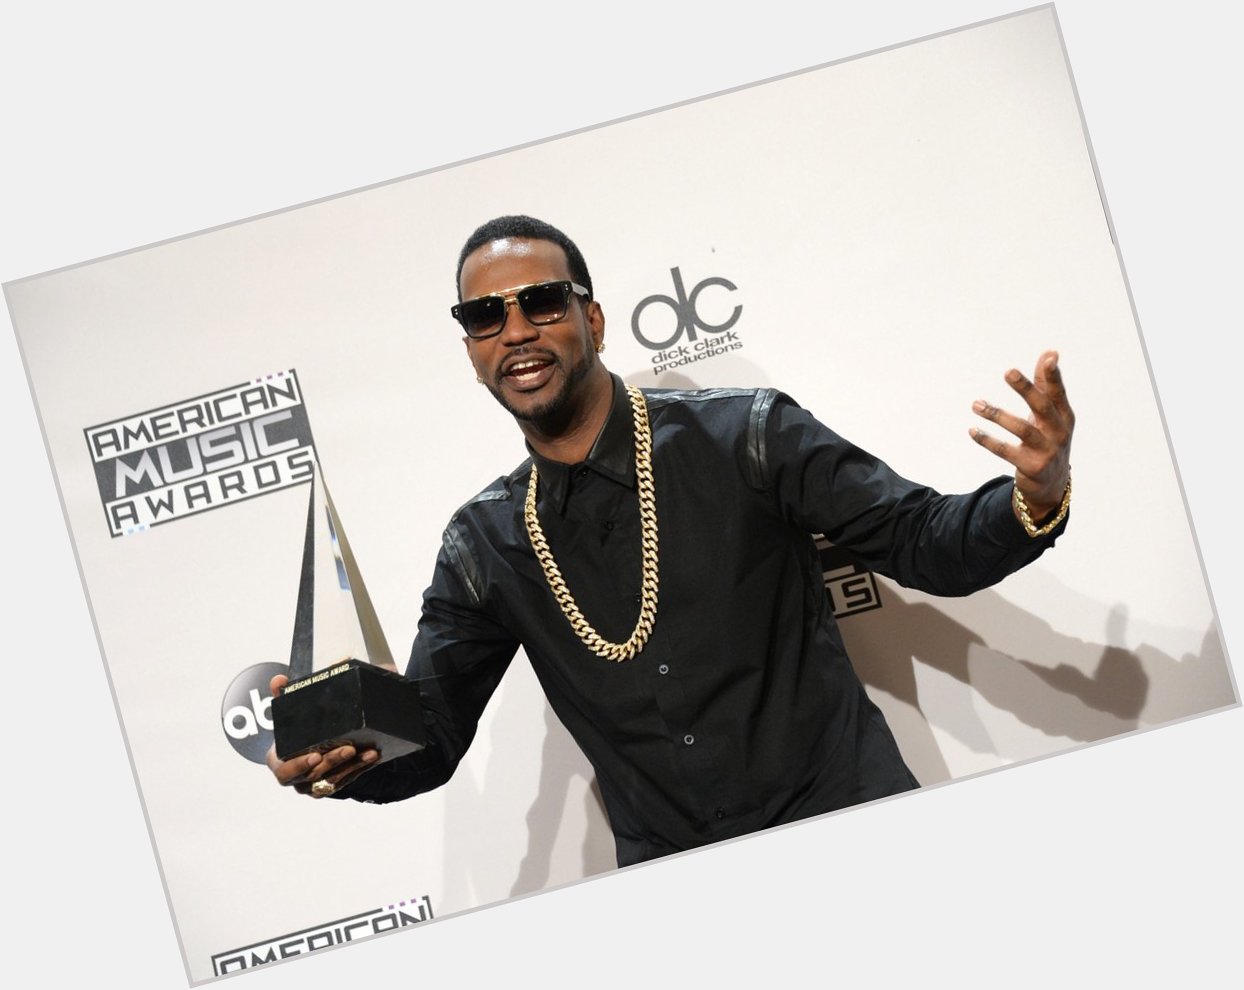 It\s Juicy J\s birthday today. How old do you think the founding Three 6 Mafia member is?  